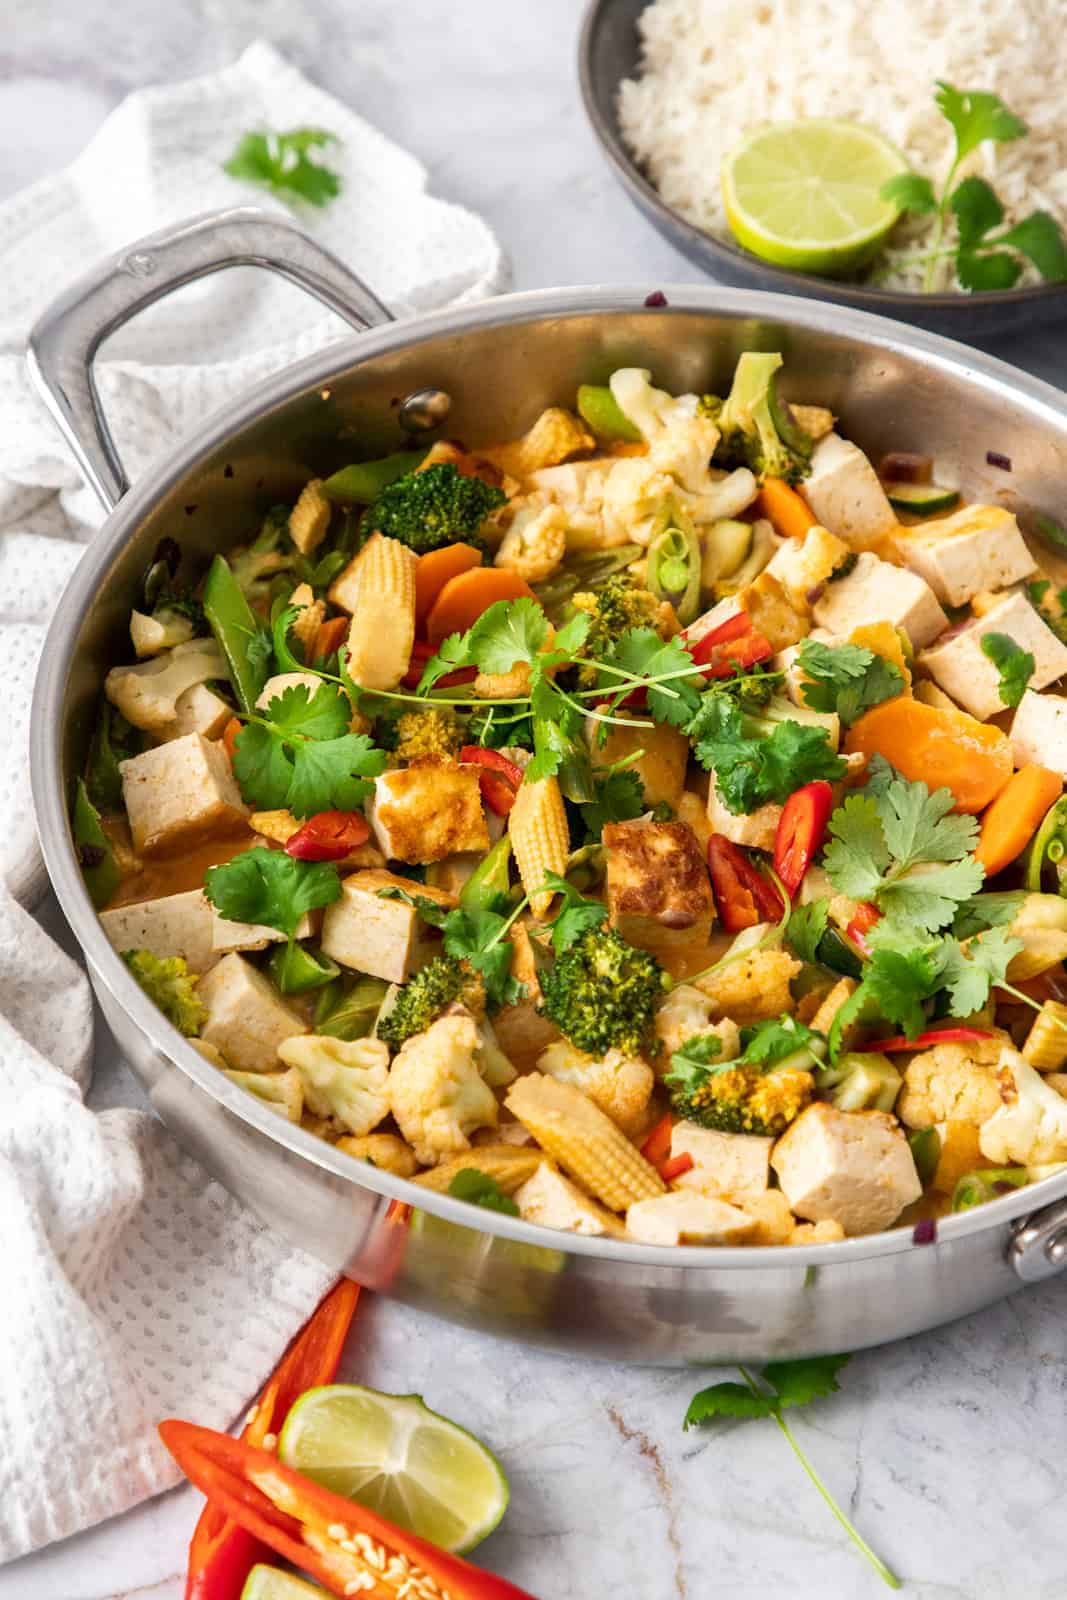 Red curry tofu stir-fry in a pan.